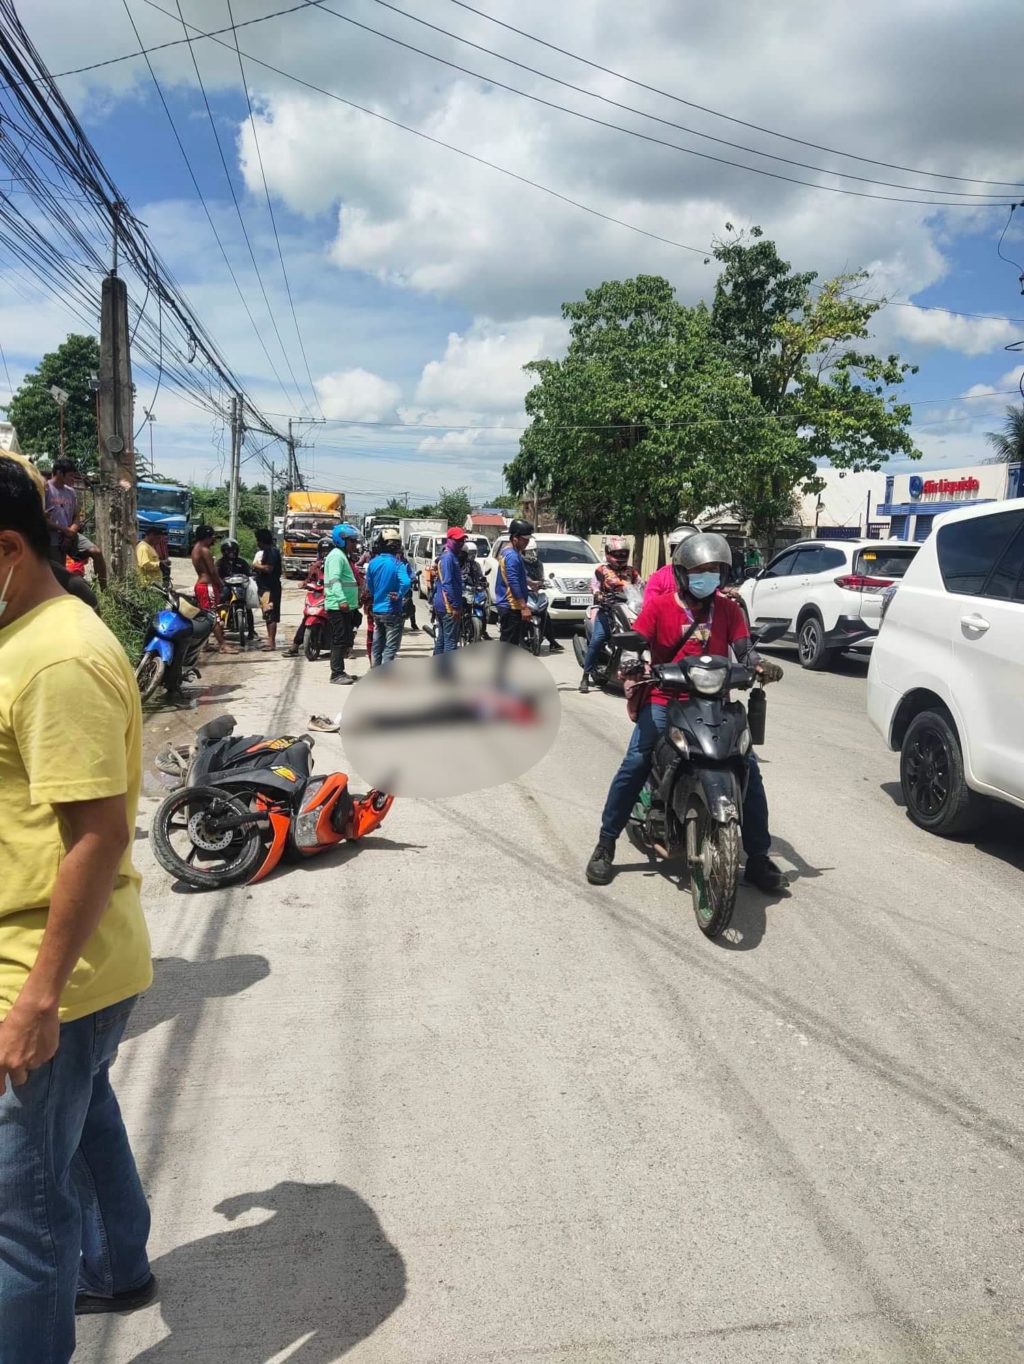 Motorcycle driver dies after he got ran over by truck in Lacion. Placido Abris dies after he was ran over by a truck when his motorcycle slipped on a slippery portion of the road and he fell on the road in Consolacion town at past noon today, Sept. 15, 2022. | Contributed photo via Paul Lauro